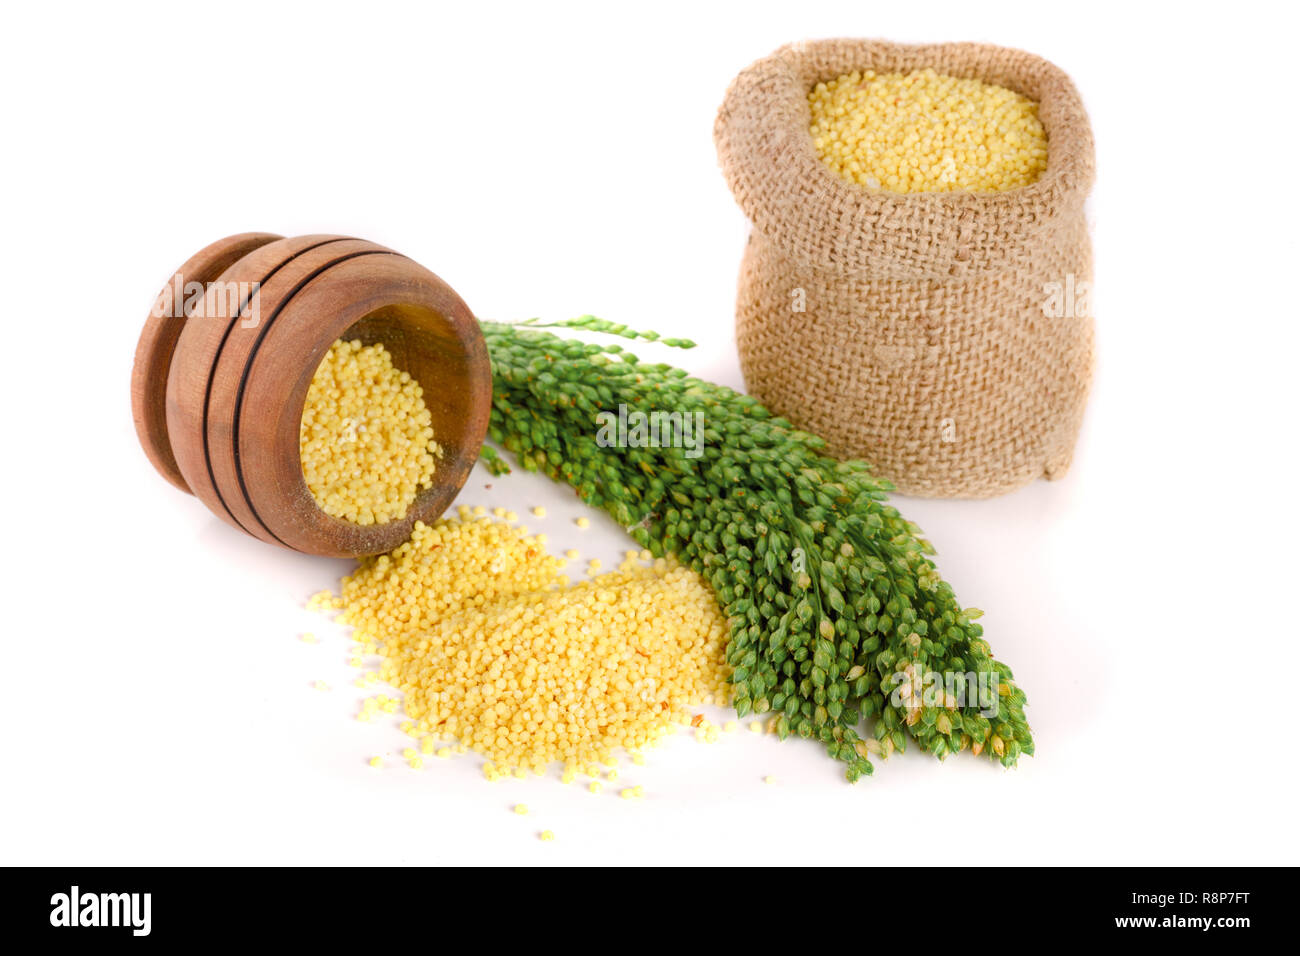 Millet in a bag and bowl with green spikelets isolated on white background Stock Photo